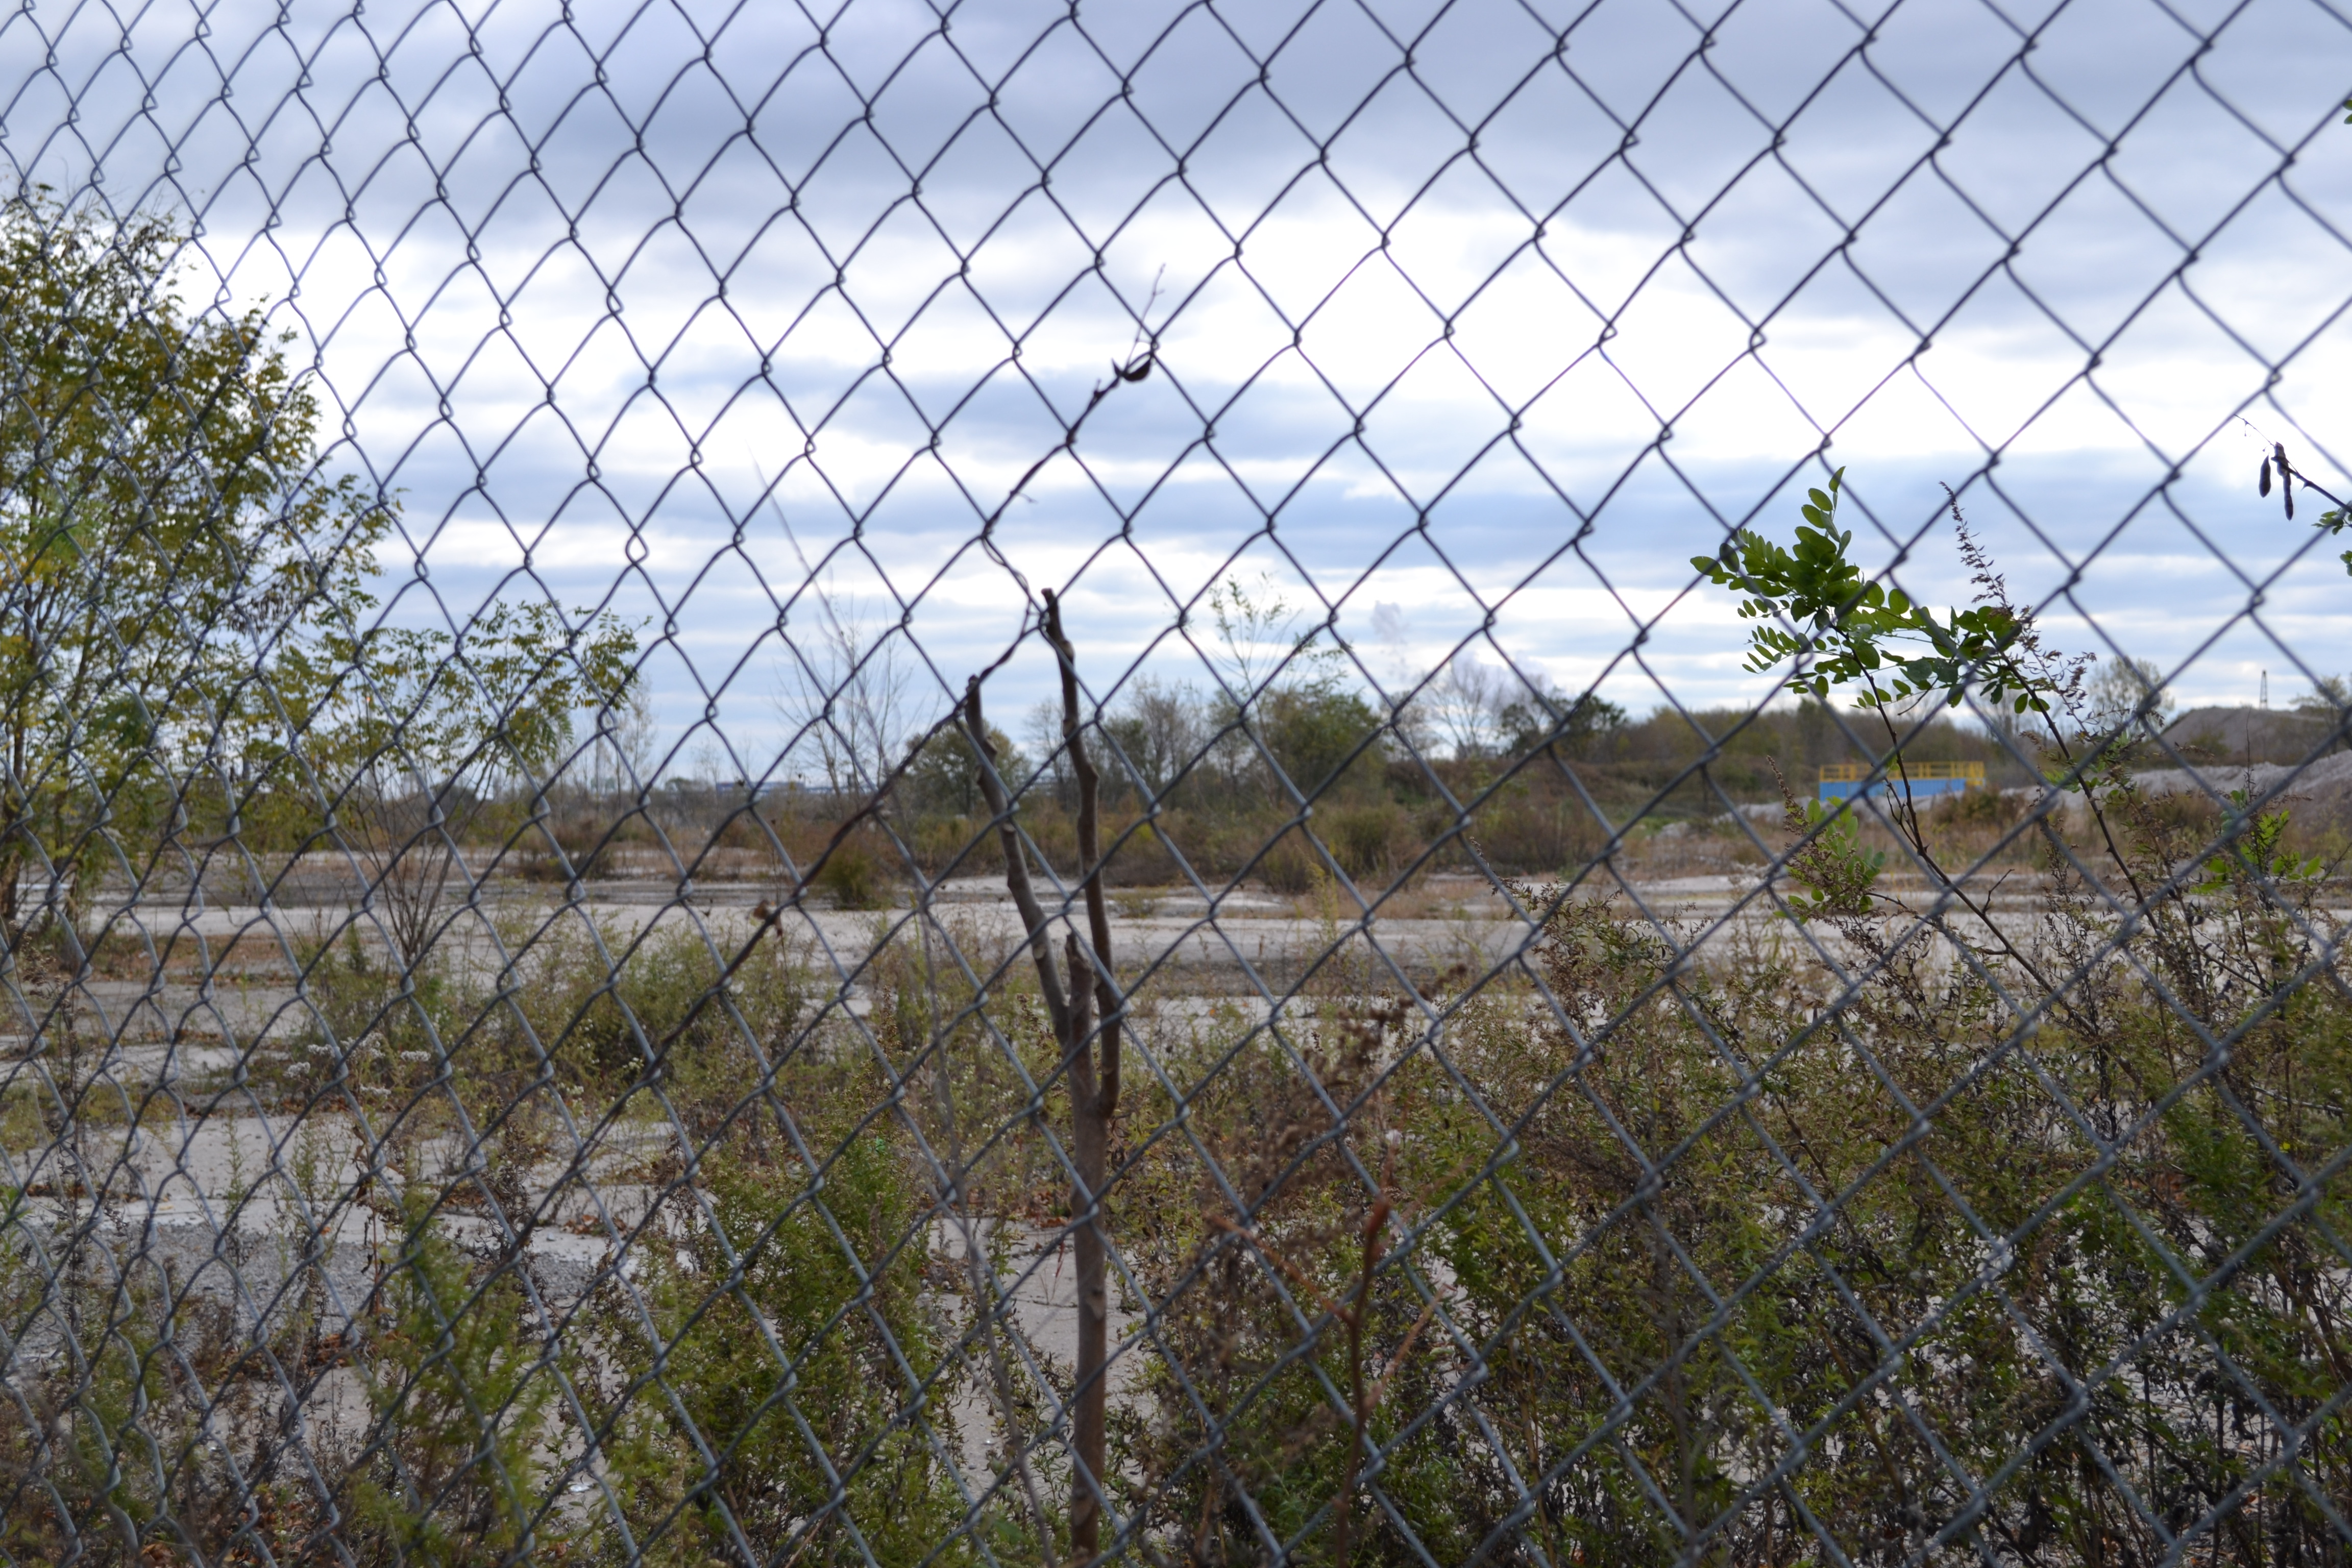 A diesel spill in the 90s has turned this vacant industrial plot into a remediation site